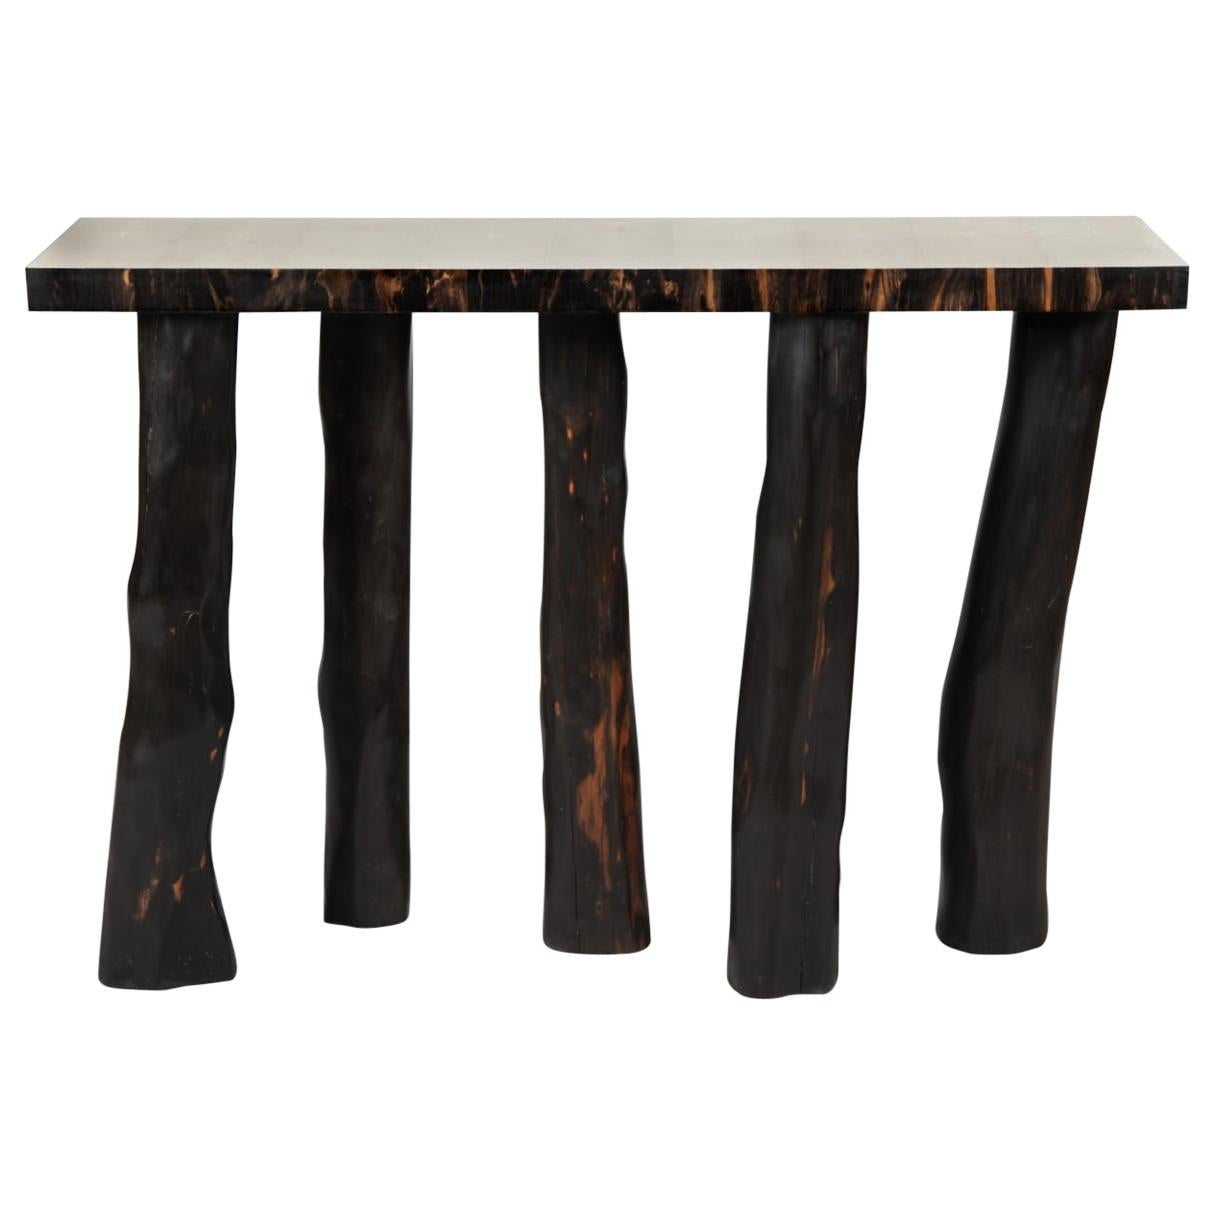 Ebony and Galuchat Shagreen Console Table, France